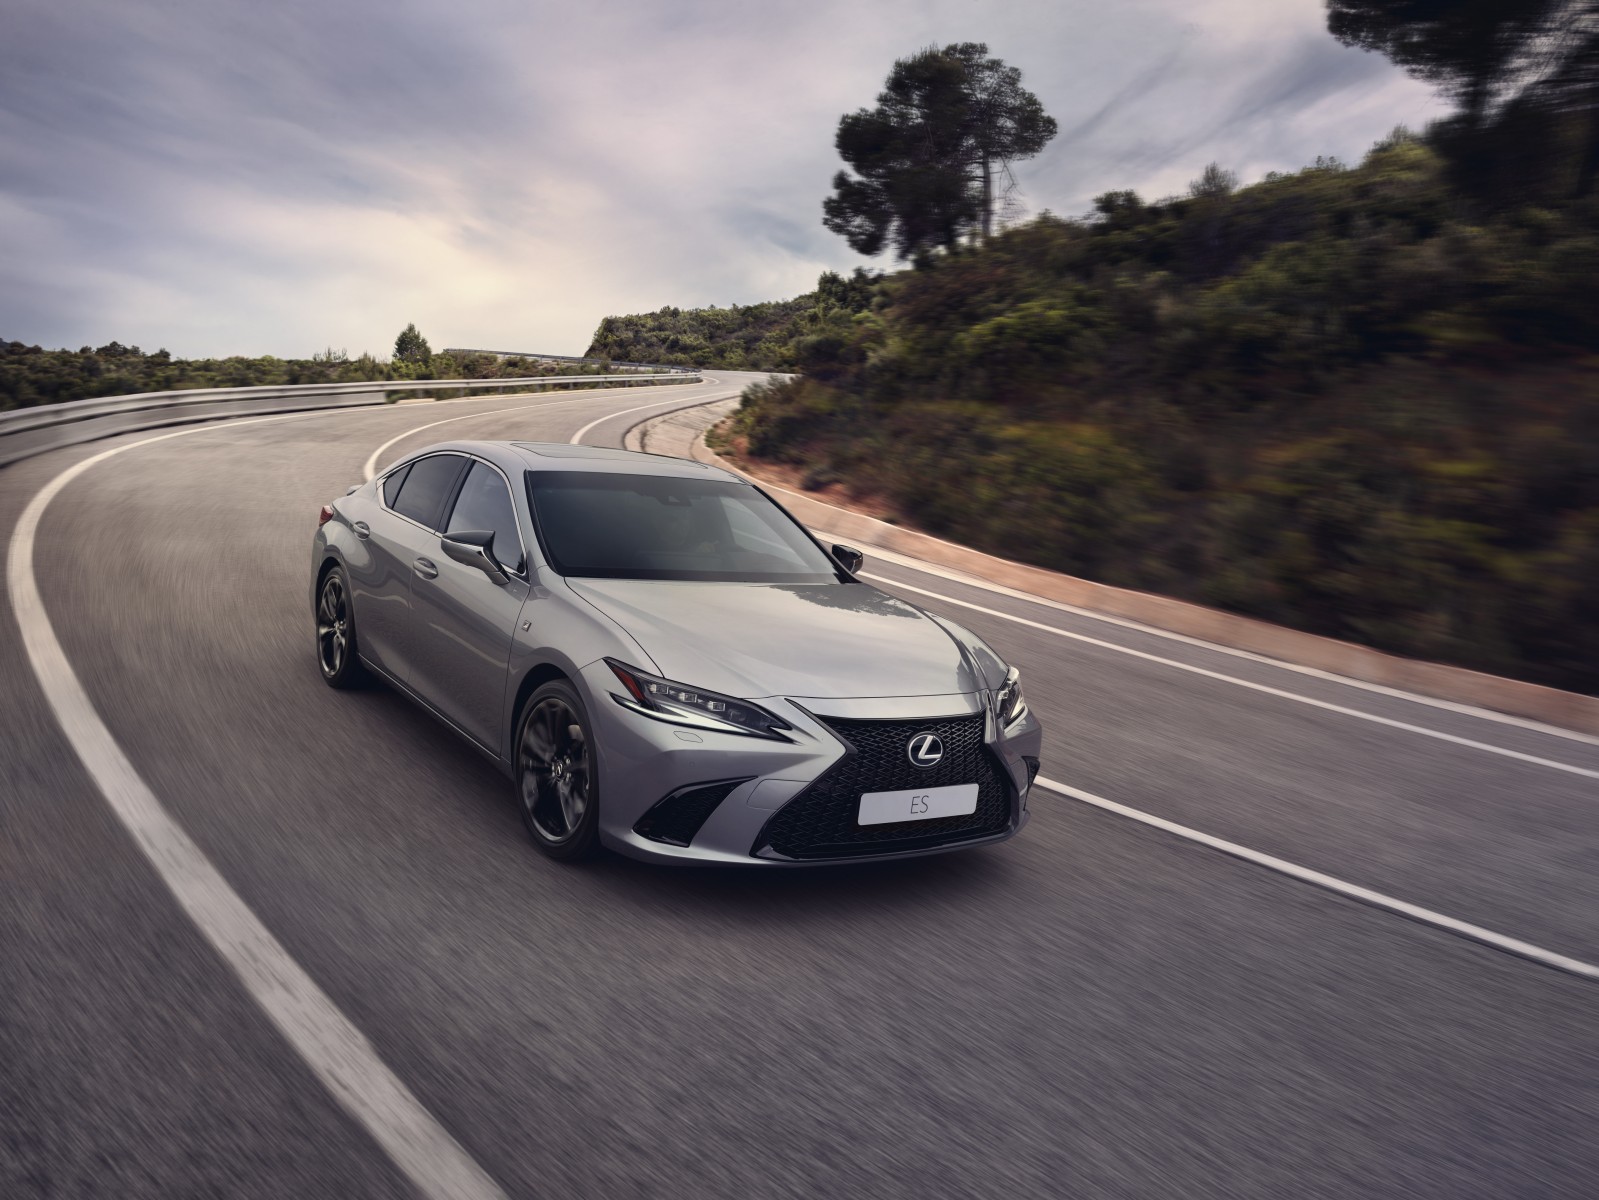 ENHANCEMENTS MADE TO LEXUS ES FOR MODEL YEAR 2023